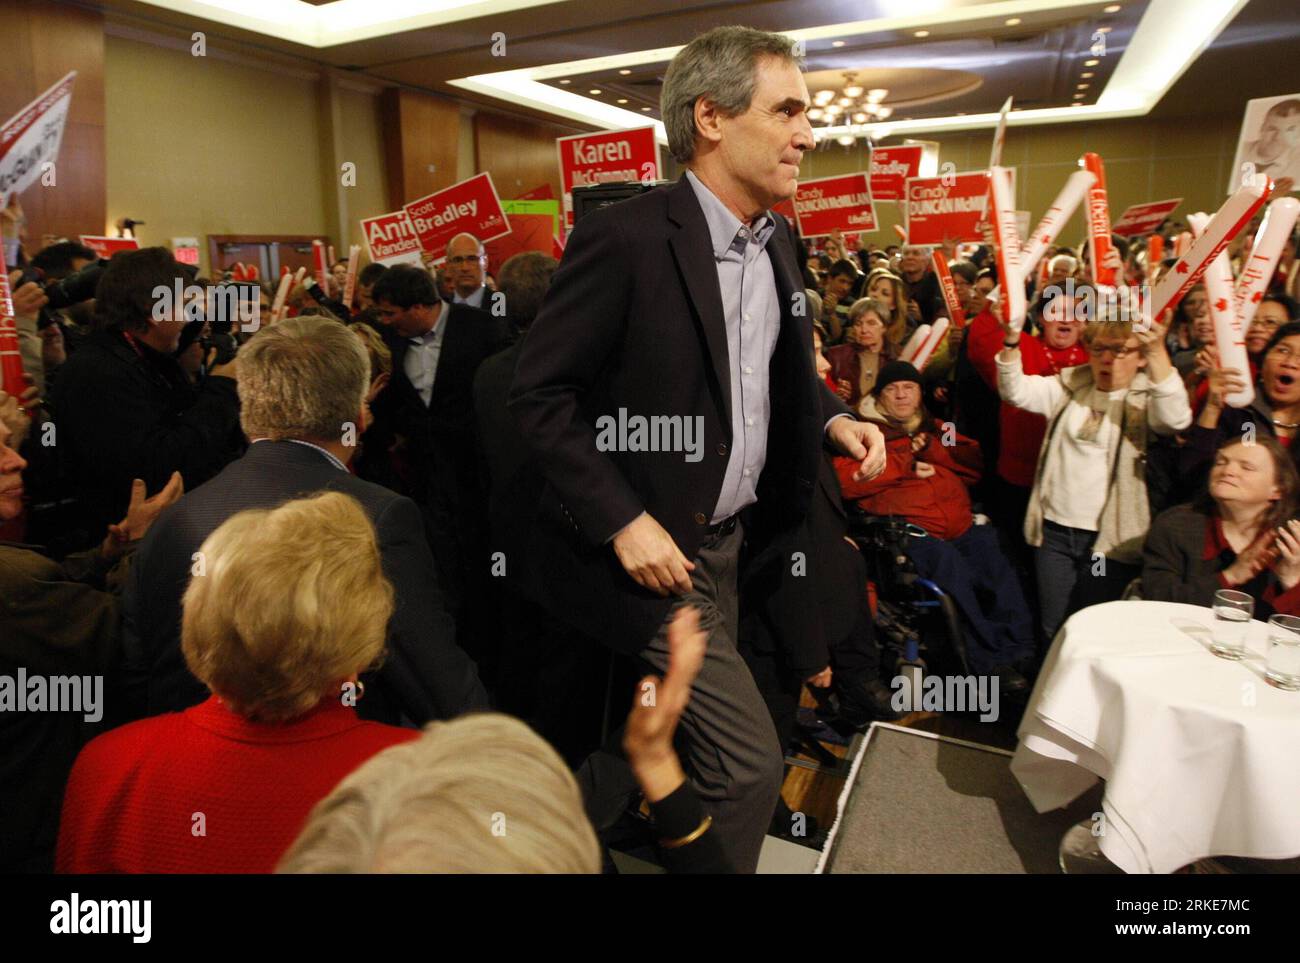 Bildnummer: 55091988  Datum: 26.03.2011  Copyright: imago/Xinhua (110327) -- OTTAWA, March 27, 2011 (Xinhua) -- Canada s Liberal Party leader Michael Ignatieff launches his campaign in Ottawa, Canada, March 26, 2011. Canada s political party leaders kicked off their campaigns for the 41st general election Saturday after the Canadian House of Commons passed a non-confidence motion defeating the Conservative government led by Prime Minister Stephen Harper for contempt of Parliament. (Xinhua/David Kawai) (lyx) CANADA-GENERAL ELECTION-PARTY LEADERS-CAMPAIGN PUBLICATIONxNOTxINxCHN People Politik Wa Stock Photo